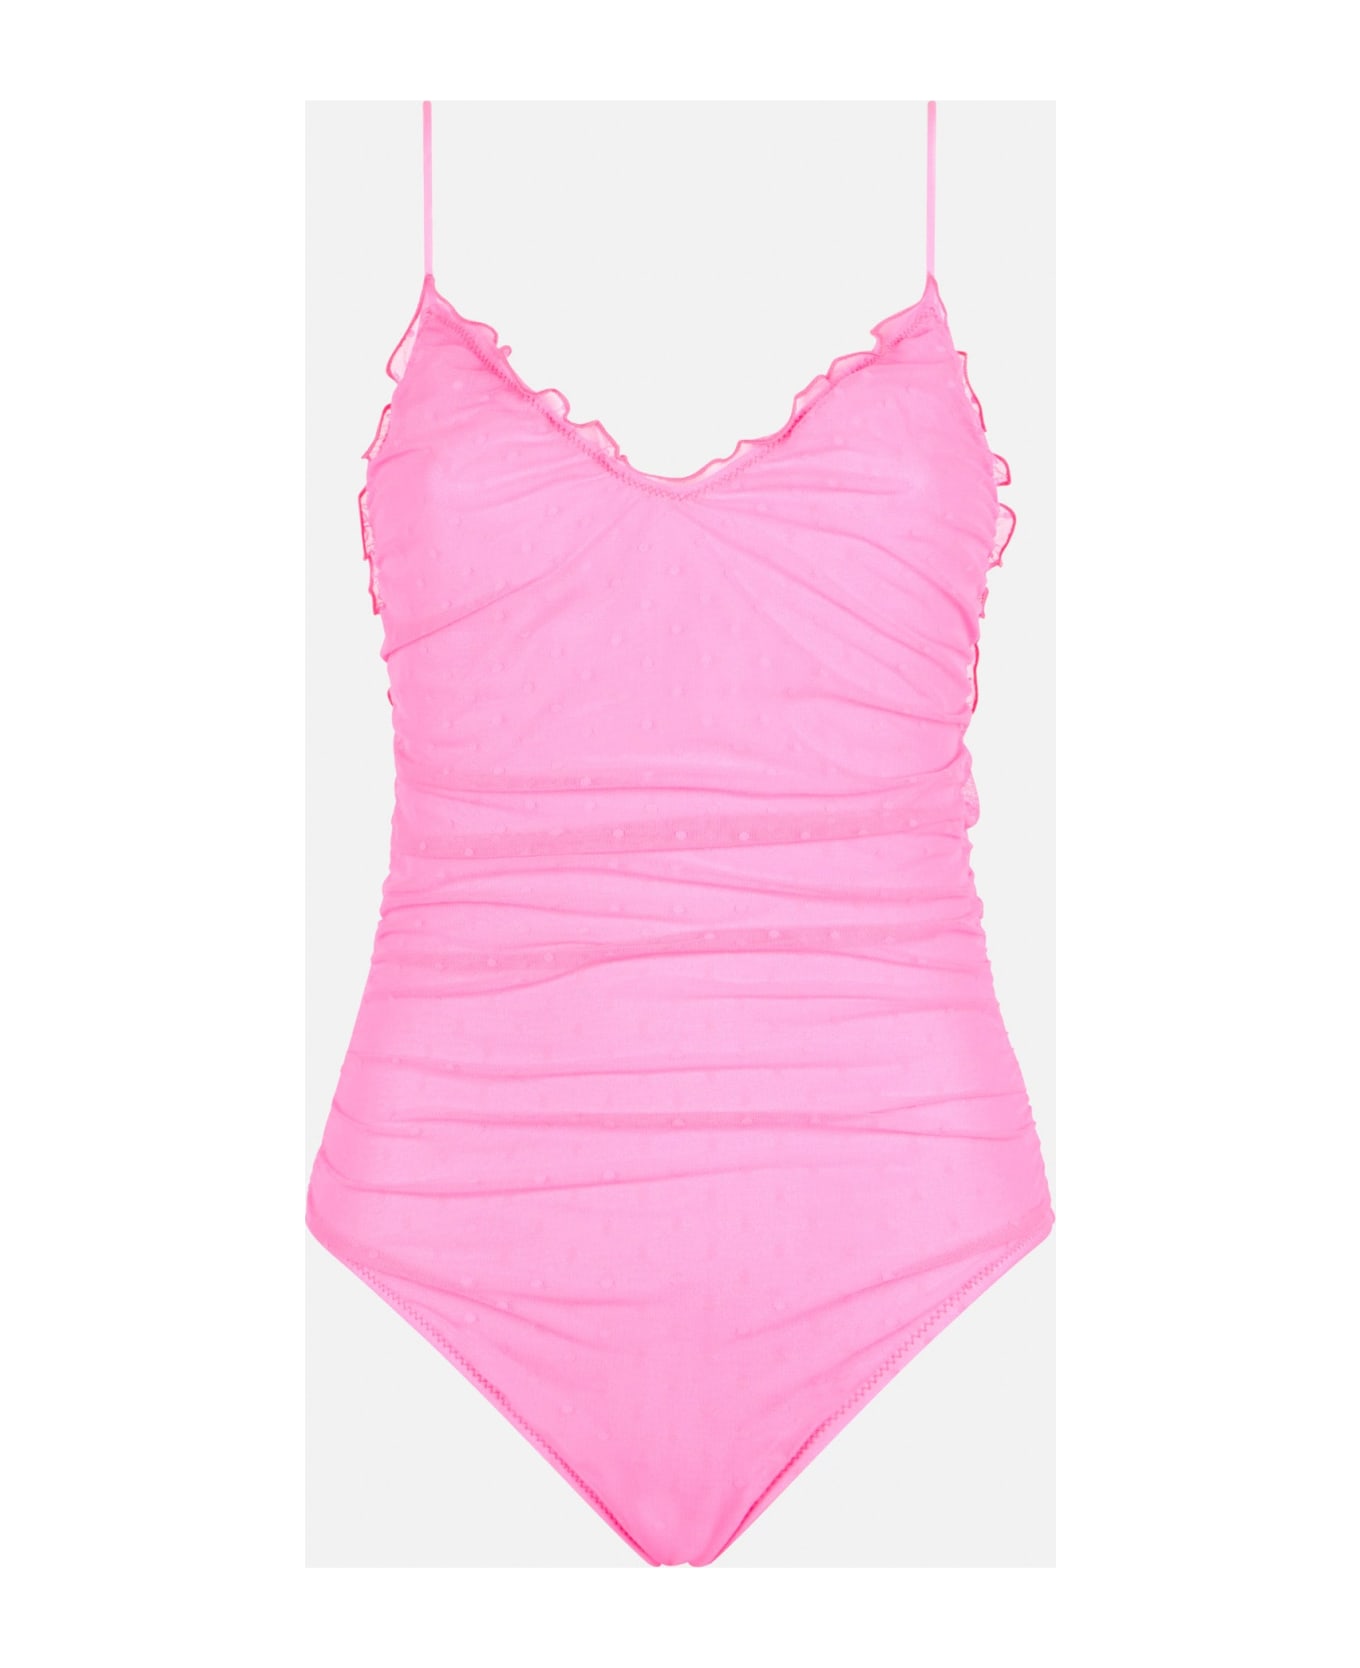 MC2 Saint Barth Fluo Pink One Piece Swimsuit - PINK ワンピース